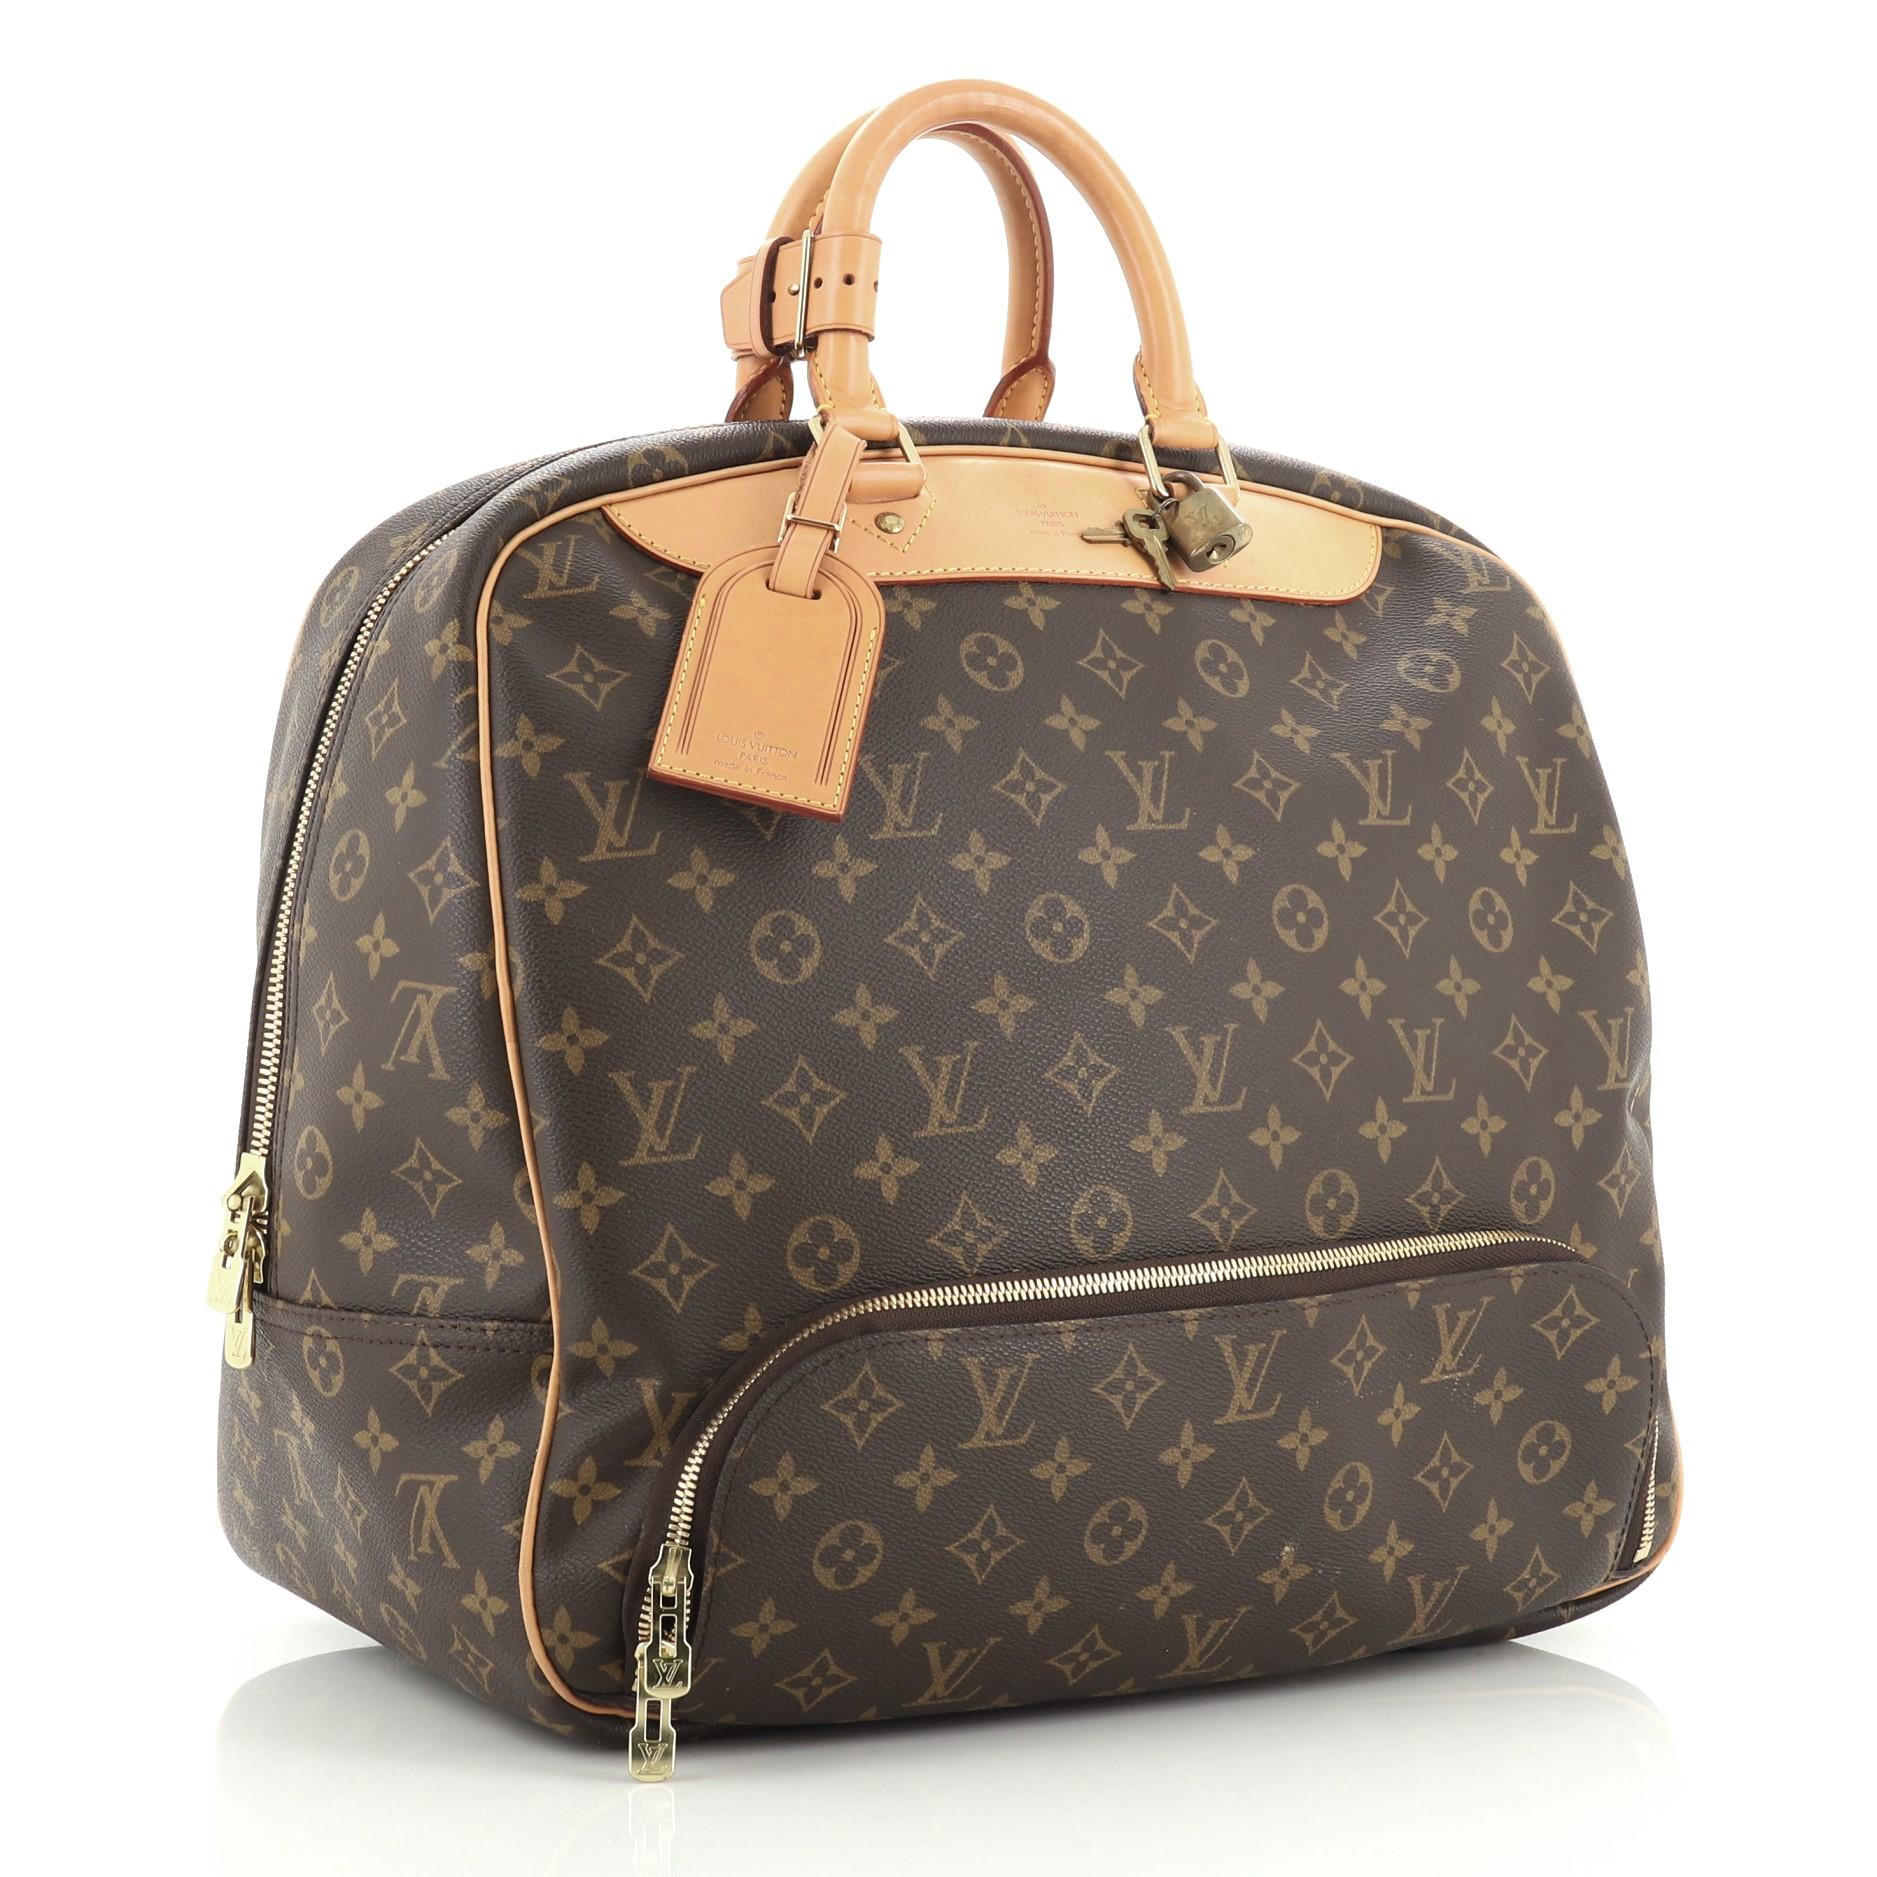 This Louis Vuitton Evasion Travel Bag Monogram Canvas MM is a travel piece ideal for your weekend getaway. Crafted from brown monogram coated canvas, it features dual rolled leather handles, natural vachetta leather trim, exterior front zip